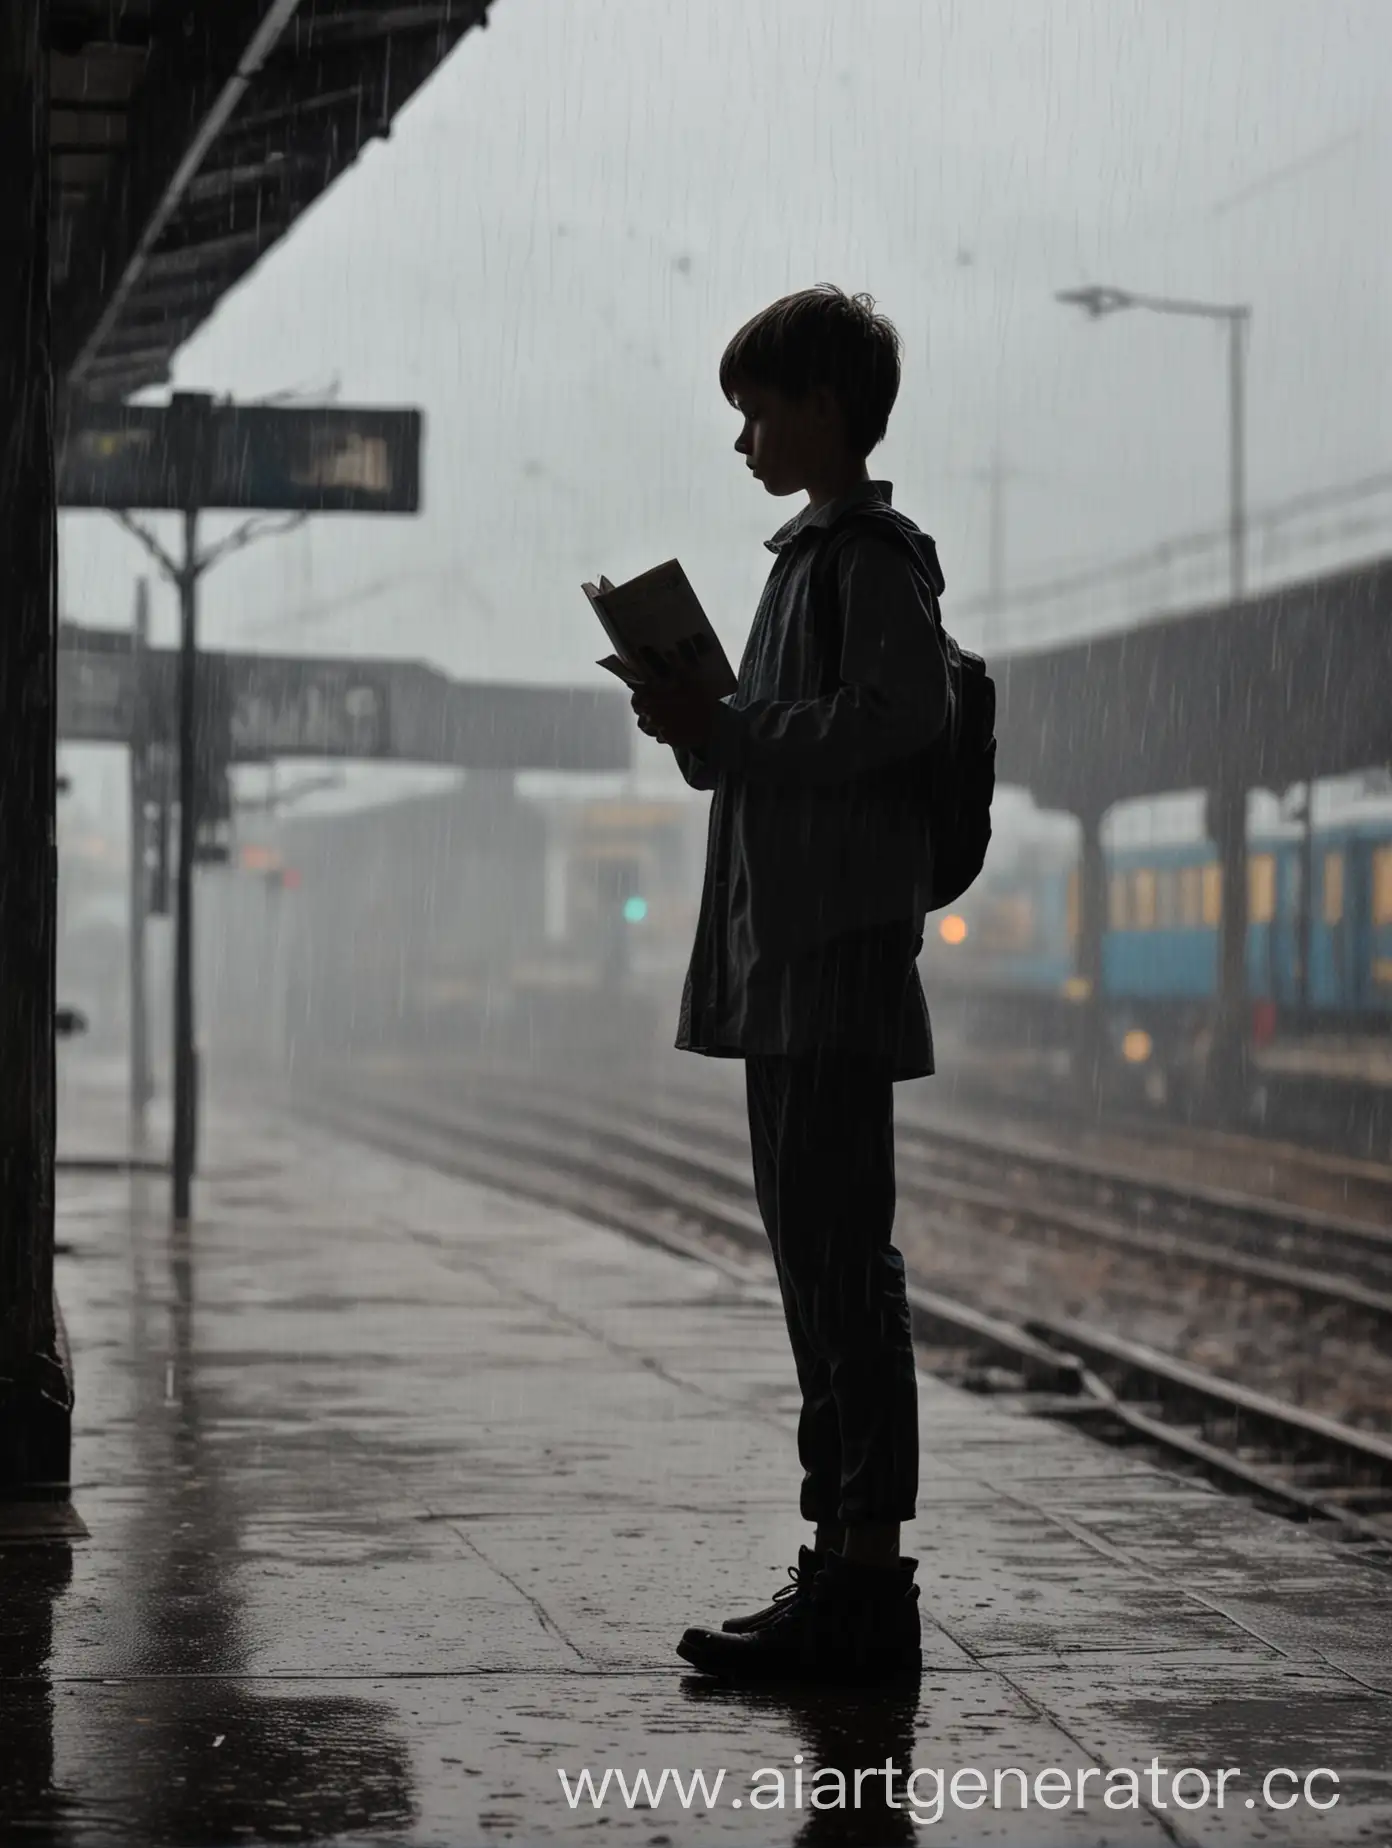 Silhouette-Boy-Holding-Book-at-Rainy-Station